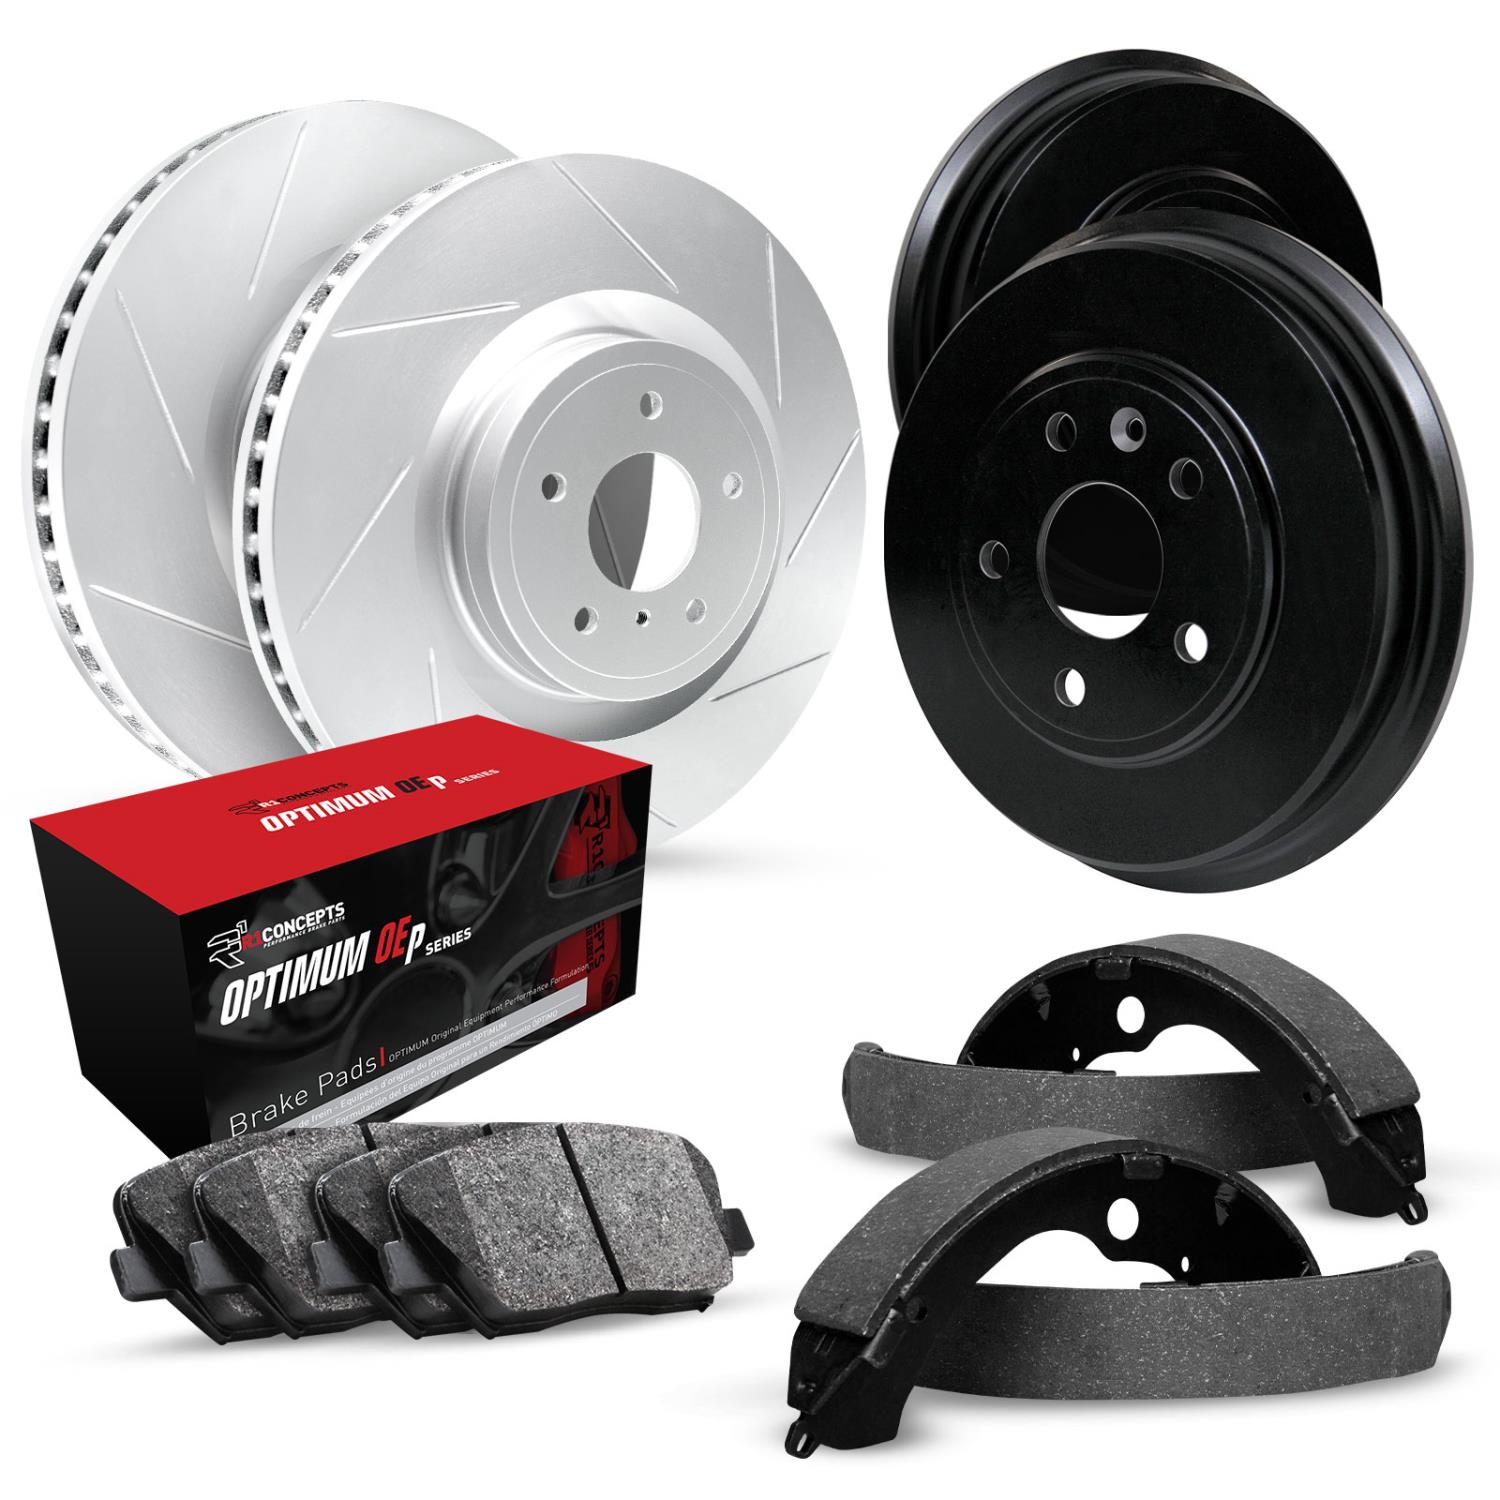 GEO-Carbon Slotted Brake Rotor & Drum Set w/Optimum OE Pads & Shoes, 1984-1984 GM, Position: Front & Rear